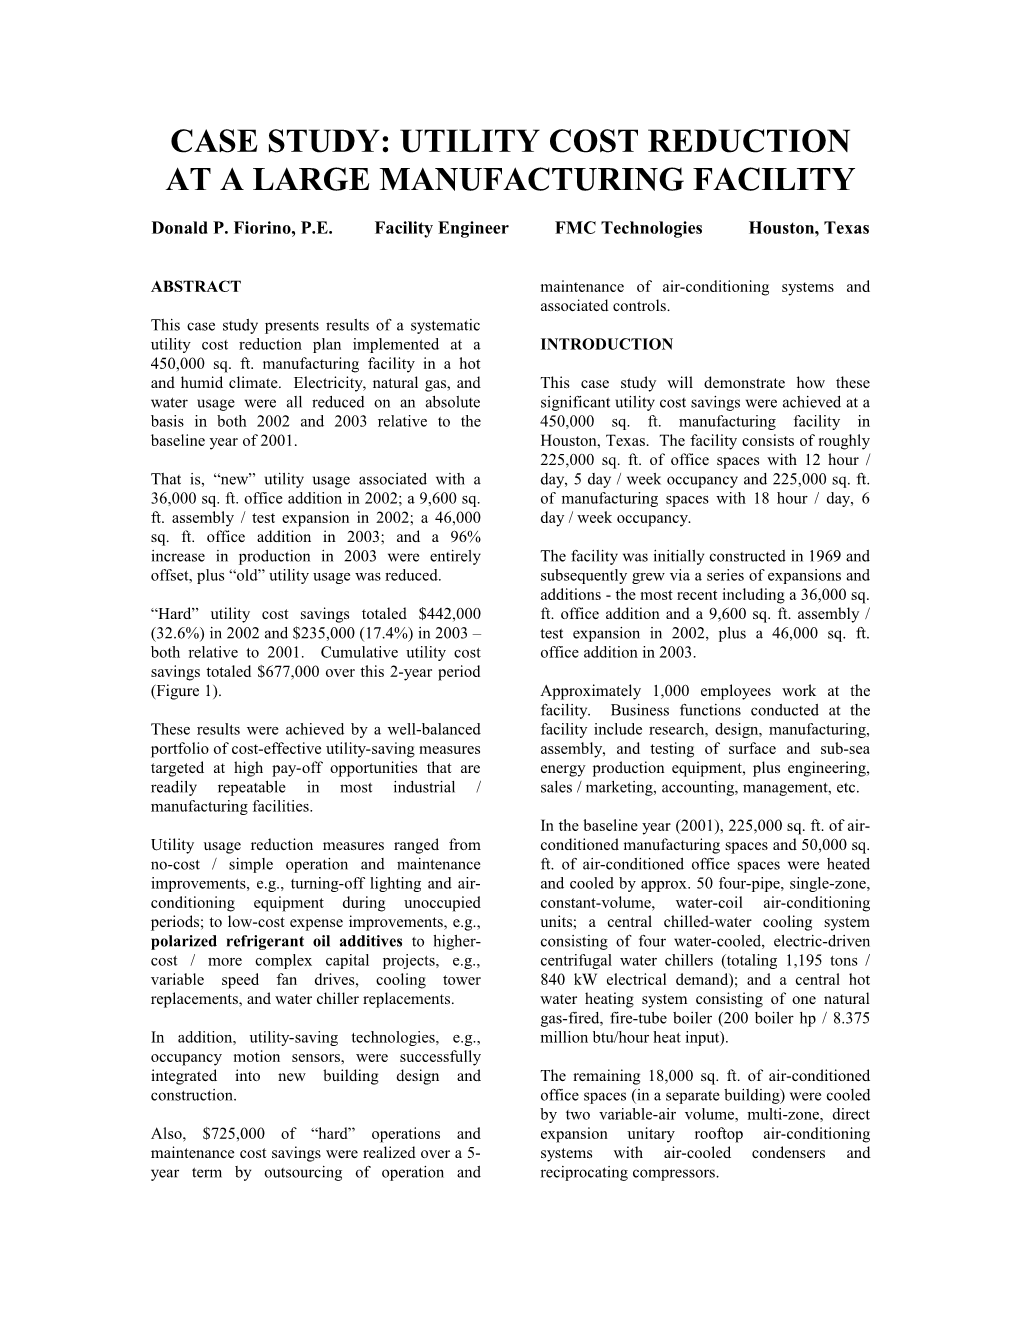 Case Study: Systematic Energy Savings in a Manufacturing Facility